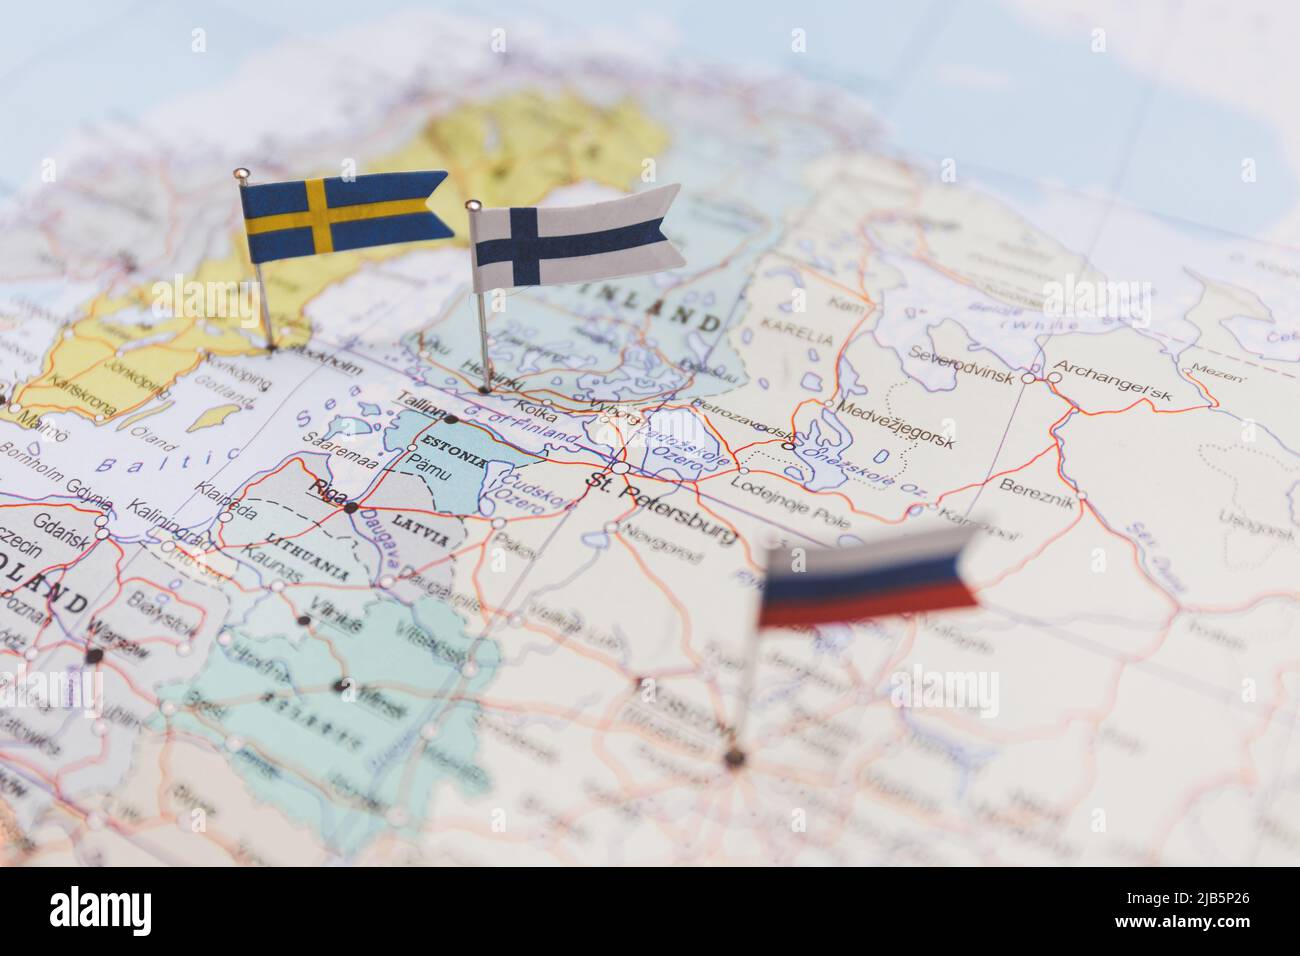 Finland and Sweden and Russian flags on Europe map. NATO flag in background Stock Photo